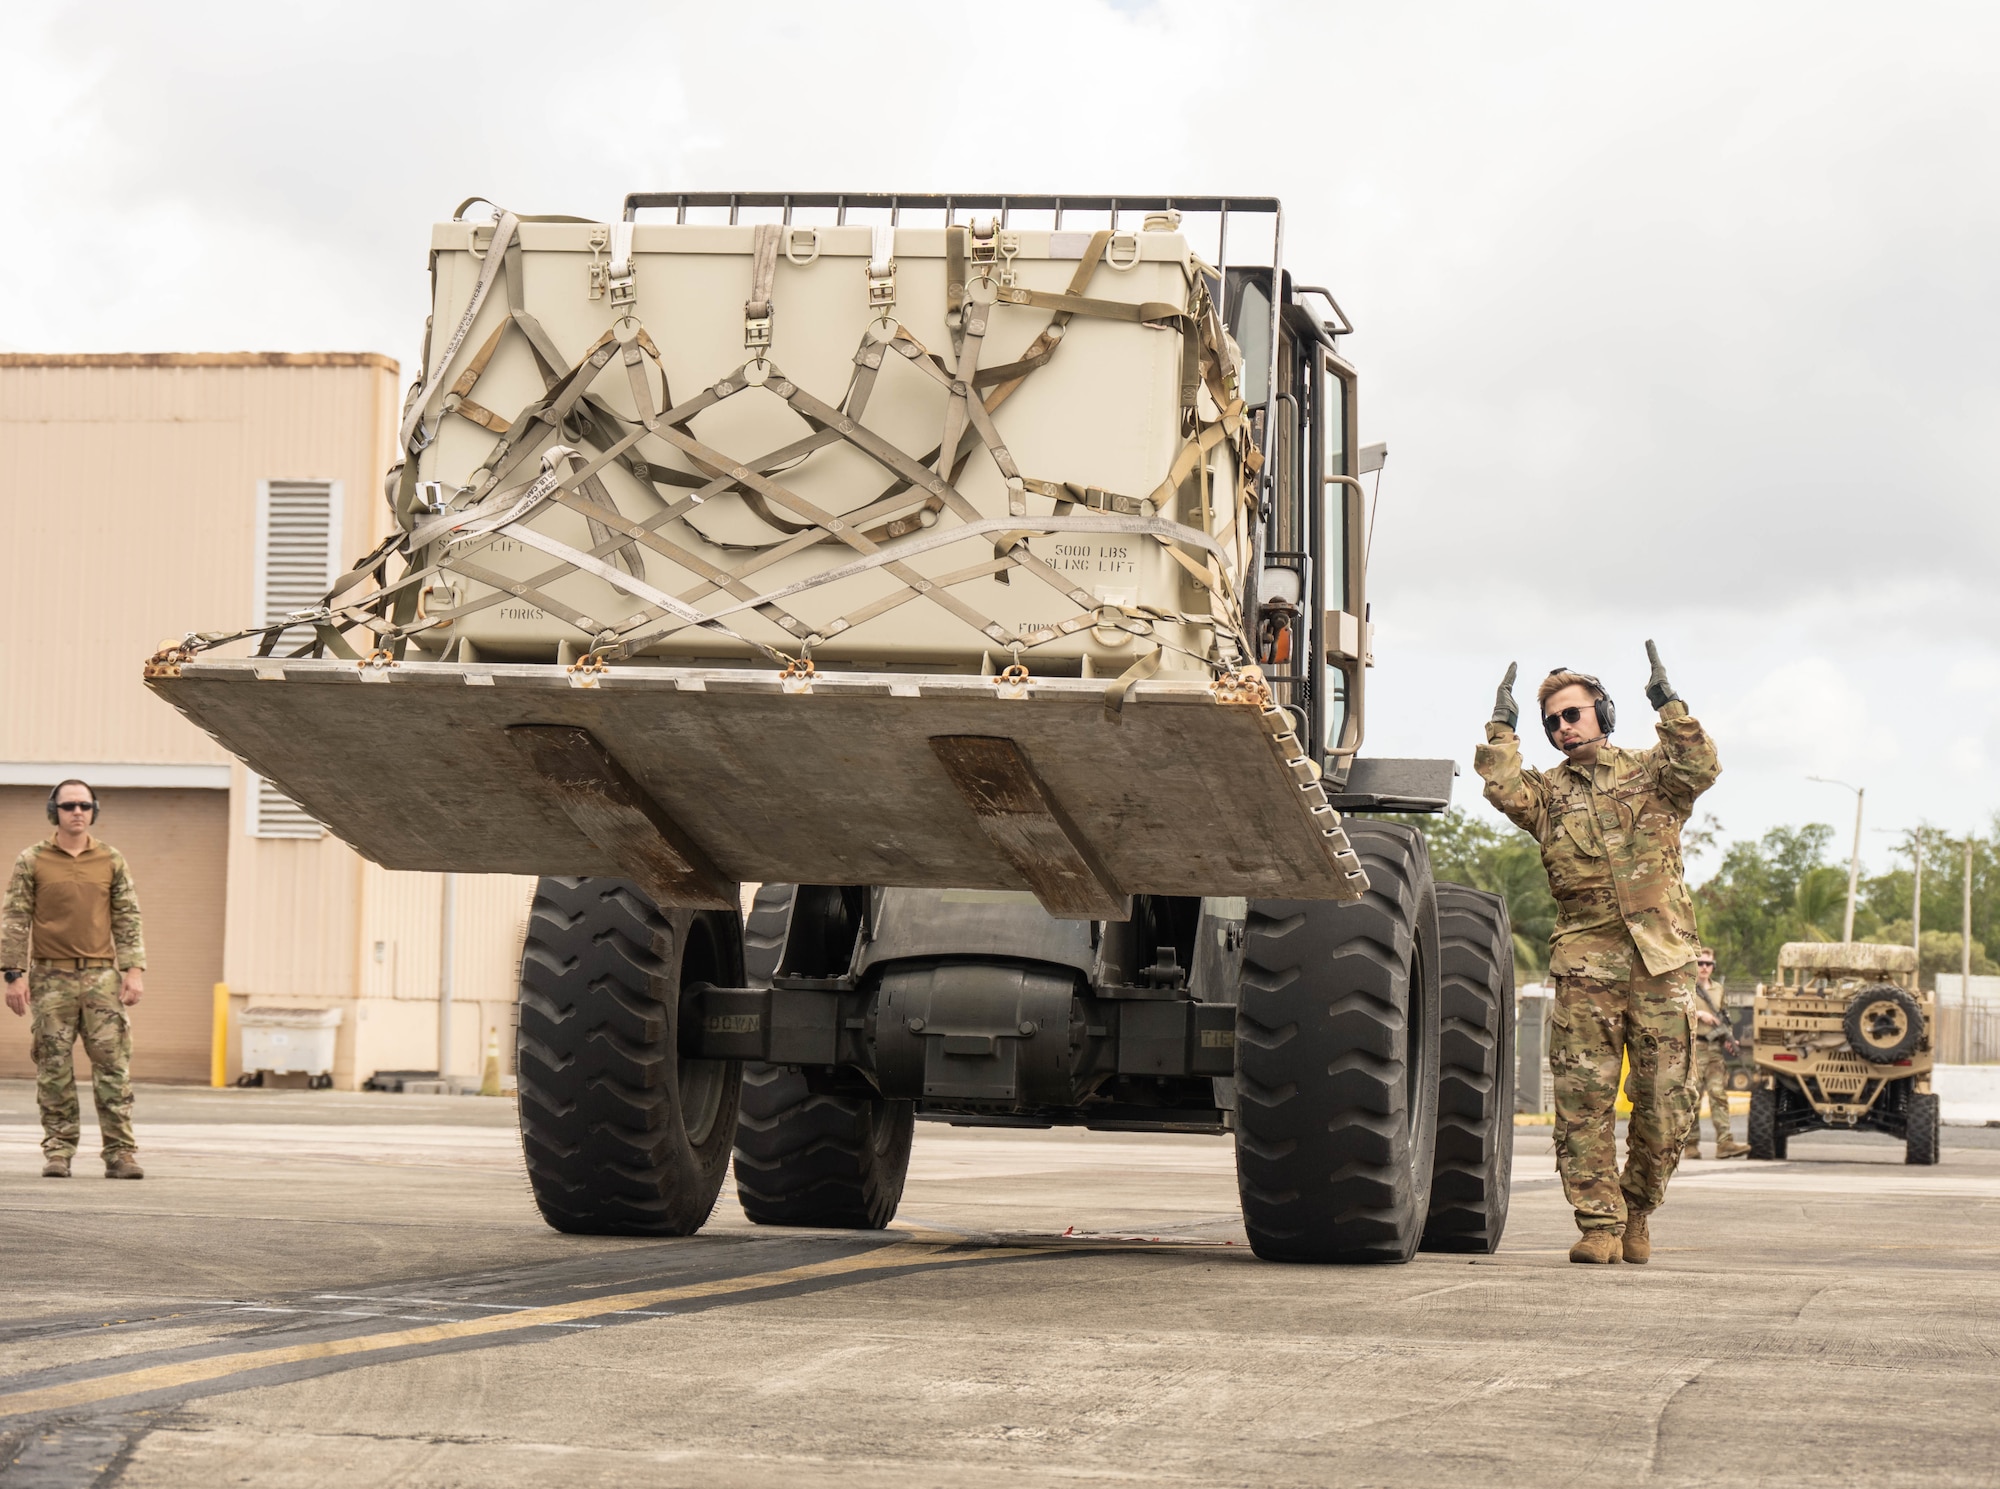 Airman directs a forklift carrying a pallet toward an aircraft on the flight line.